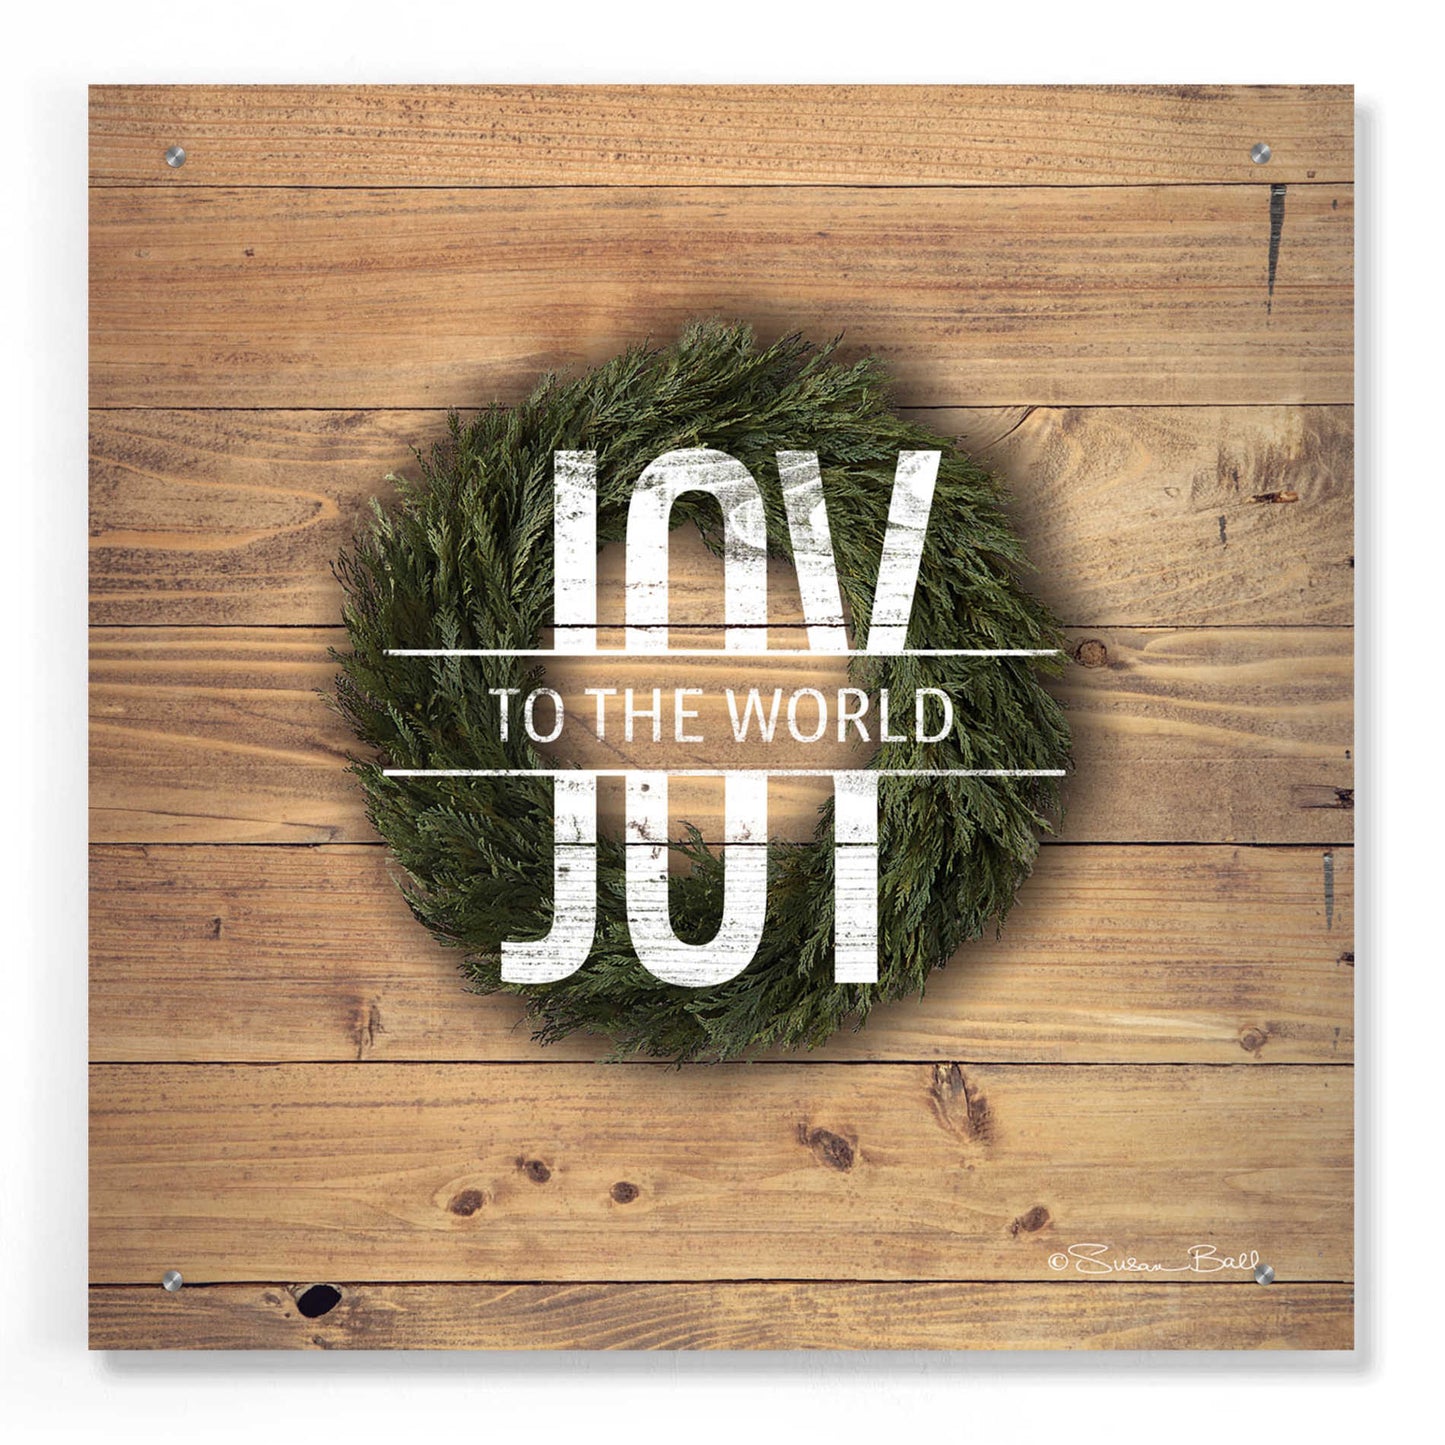 Epic Art 'Joy to the World with Wreath' by Susan Ball, Acrylic Glass Wall Art,24x24